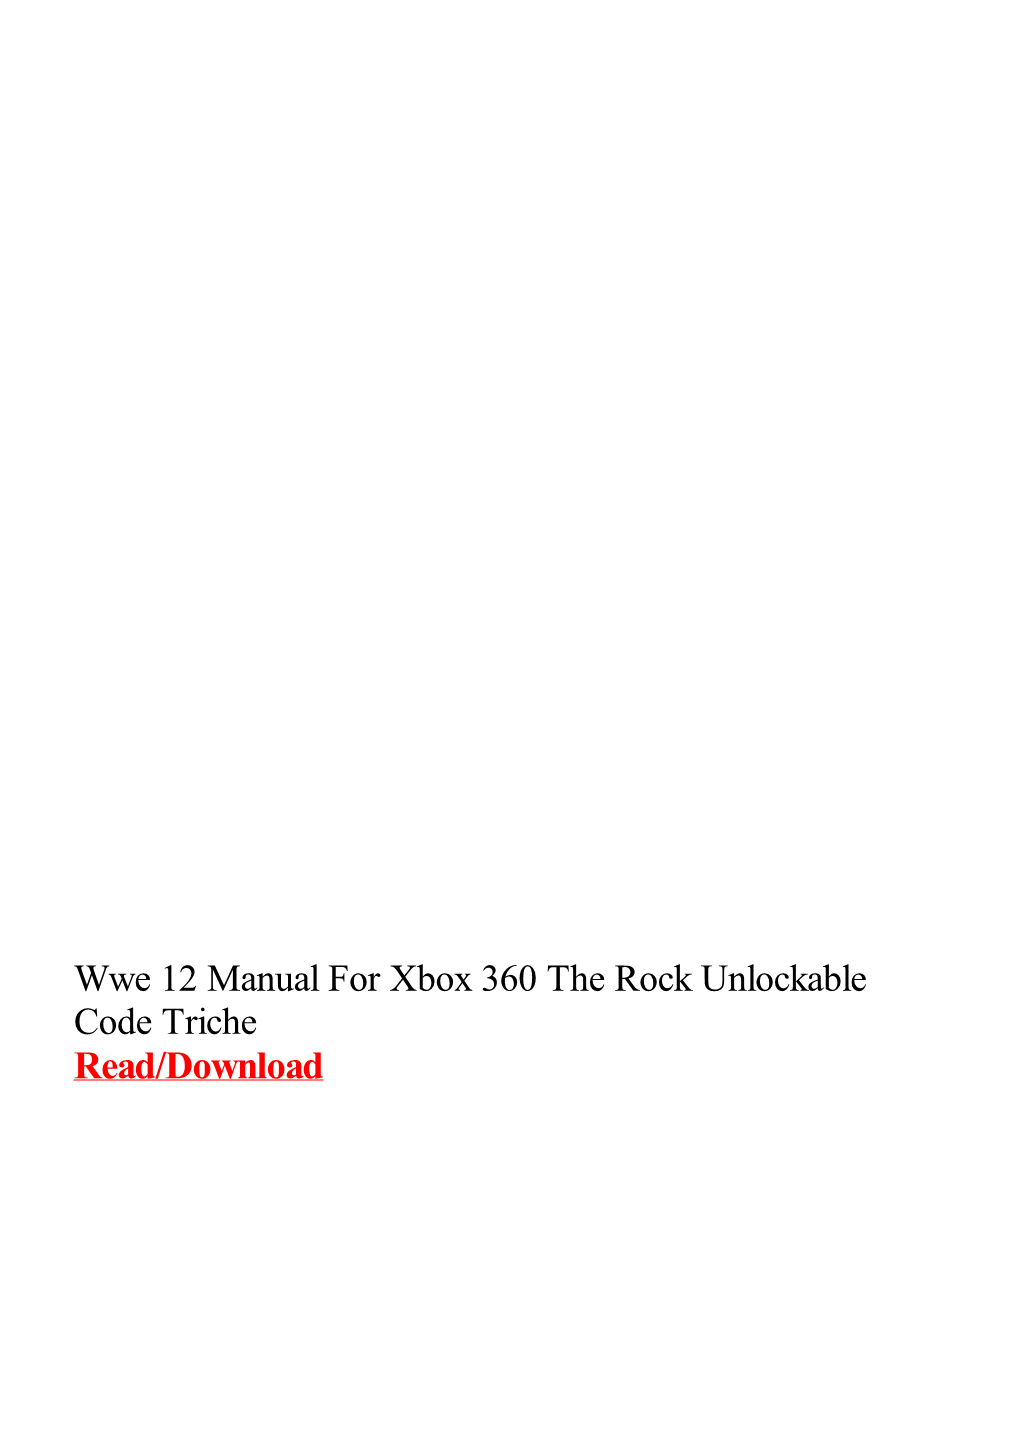 Wwe 12 Manual for Xbox 360 the Rock Unlockable Code Triche